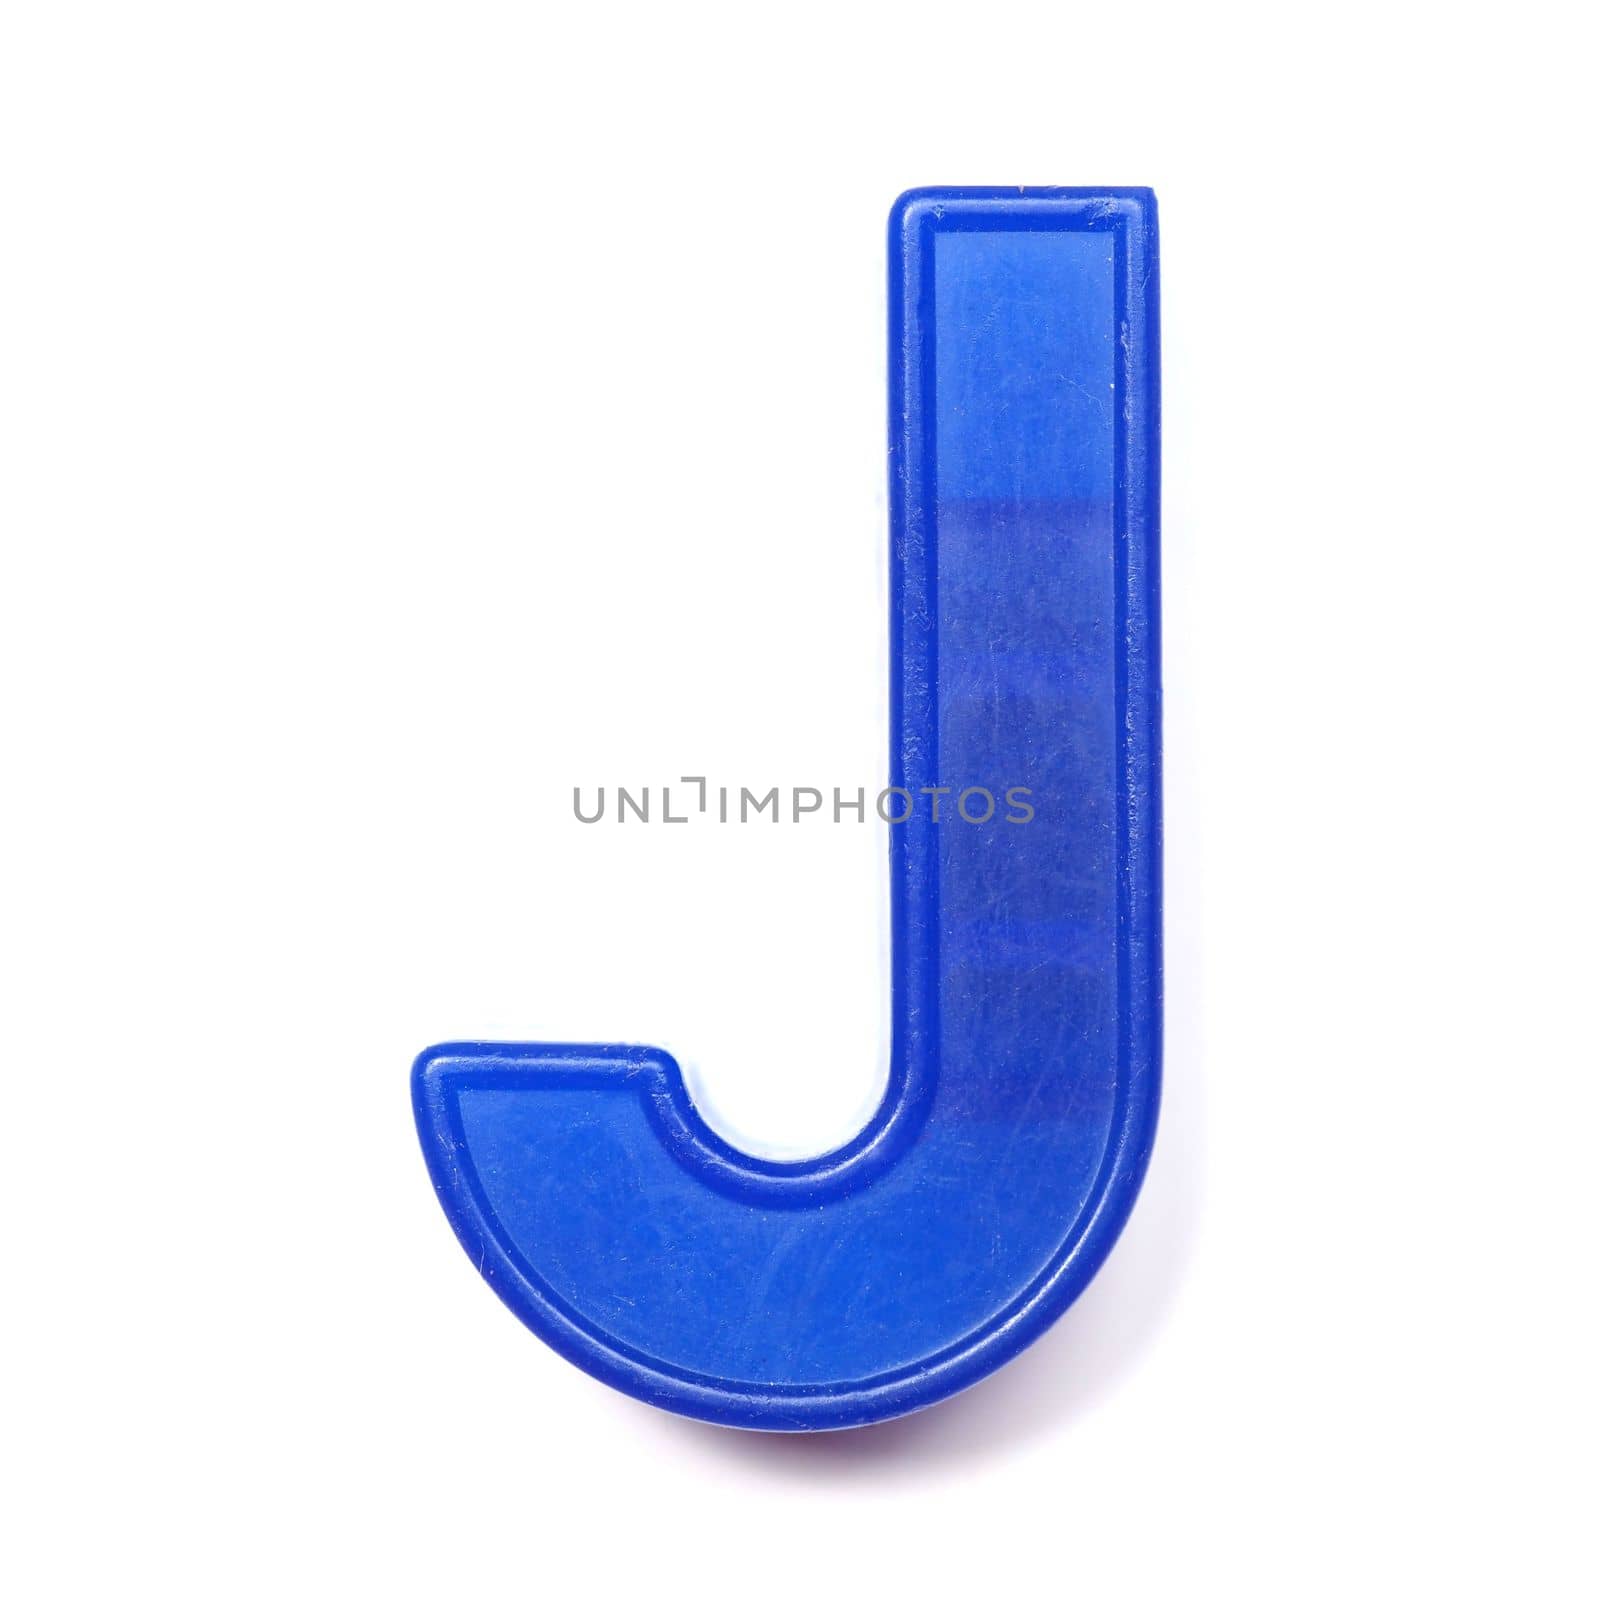 Magnetic uppercase letter J by claudiodivizia